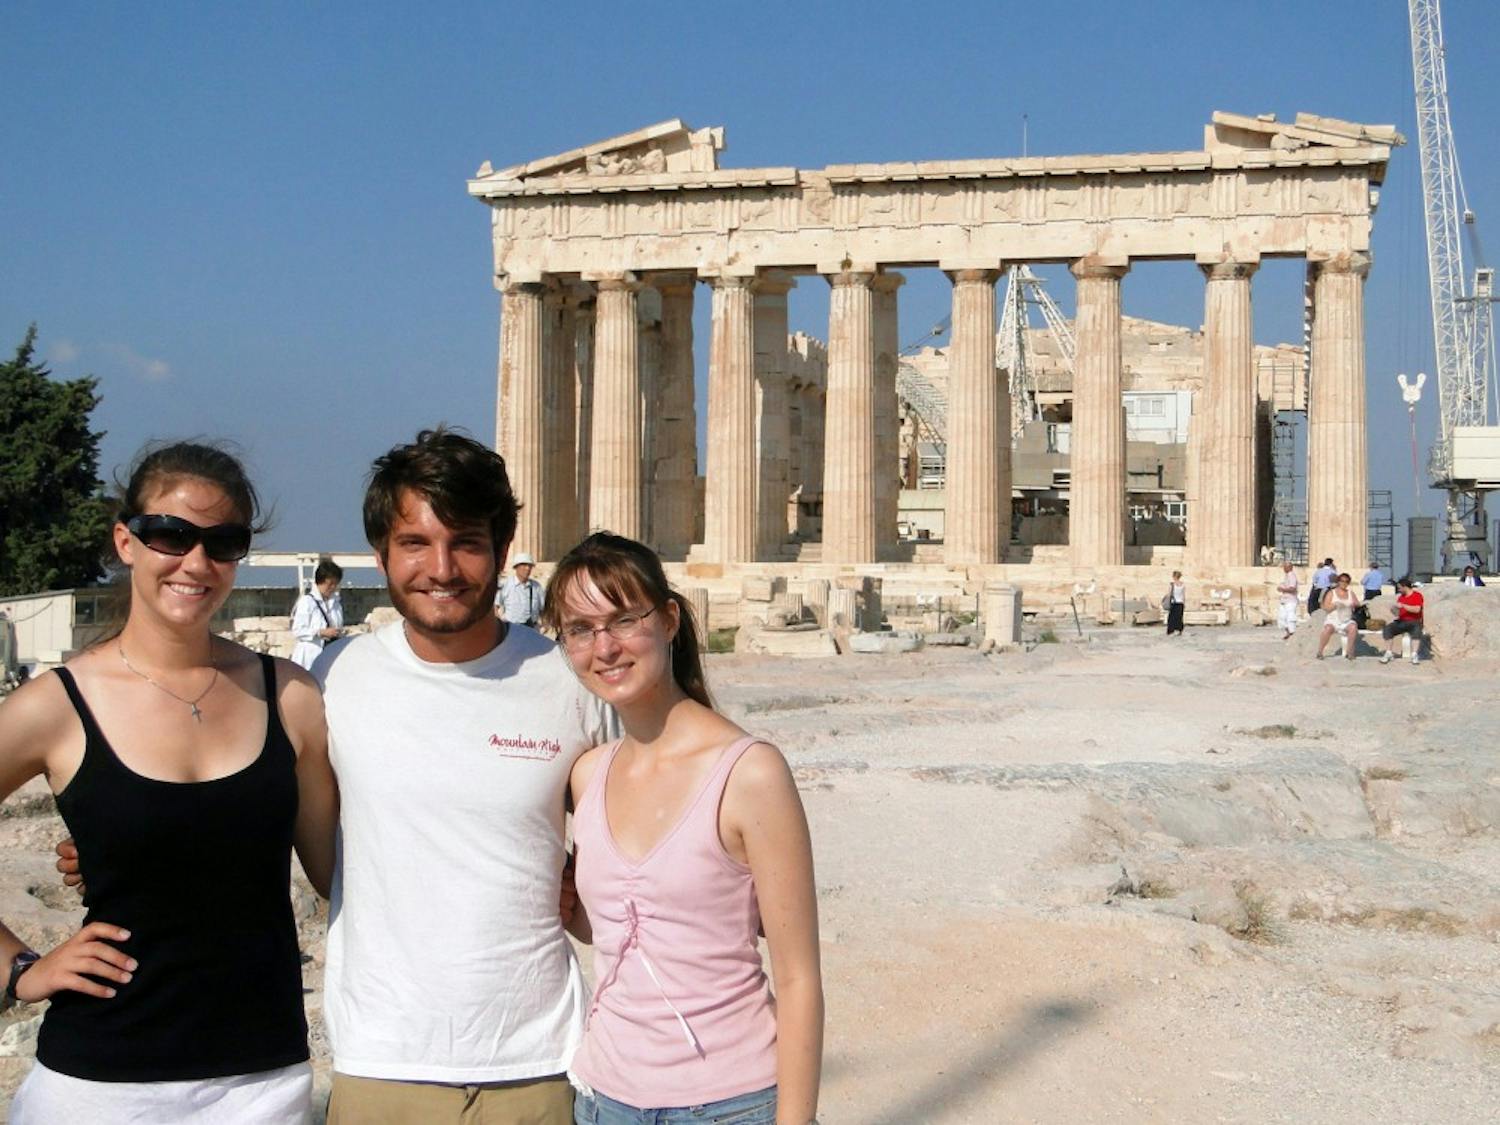 Bass, Earl Parsons and Sebranek pose for a picture at the Parthenon in Athens as a part of their Mediterranean History Tour, which lasted 35 days and spanned four countries.